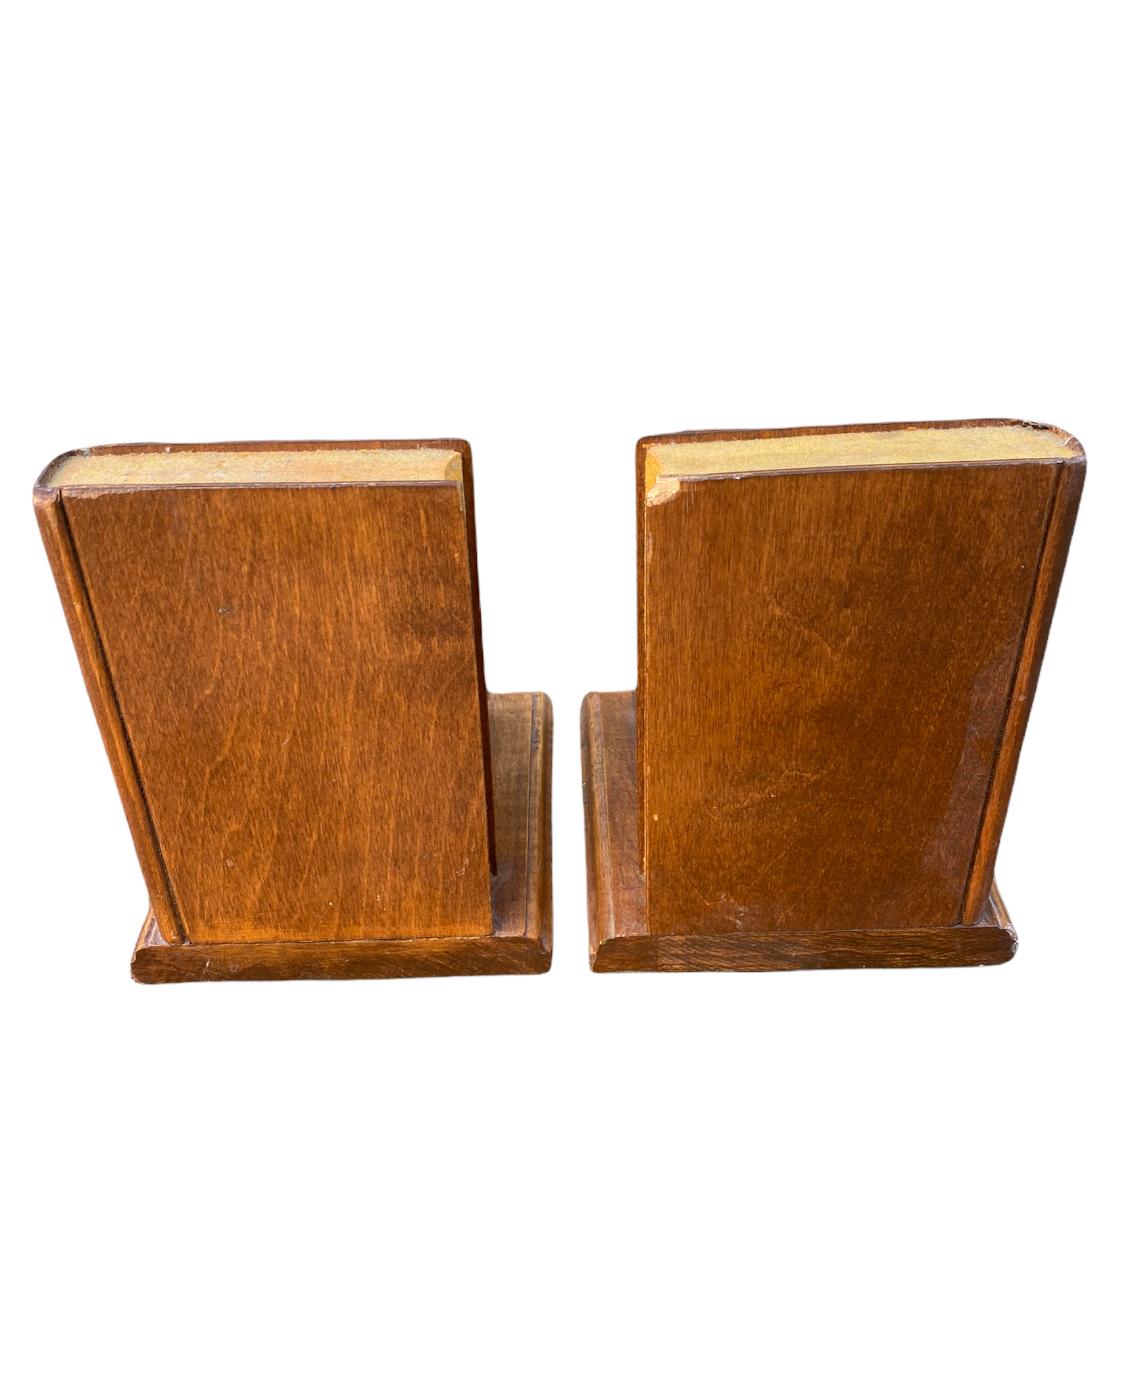 Antique Bookends with Academic Motif 3